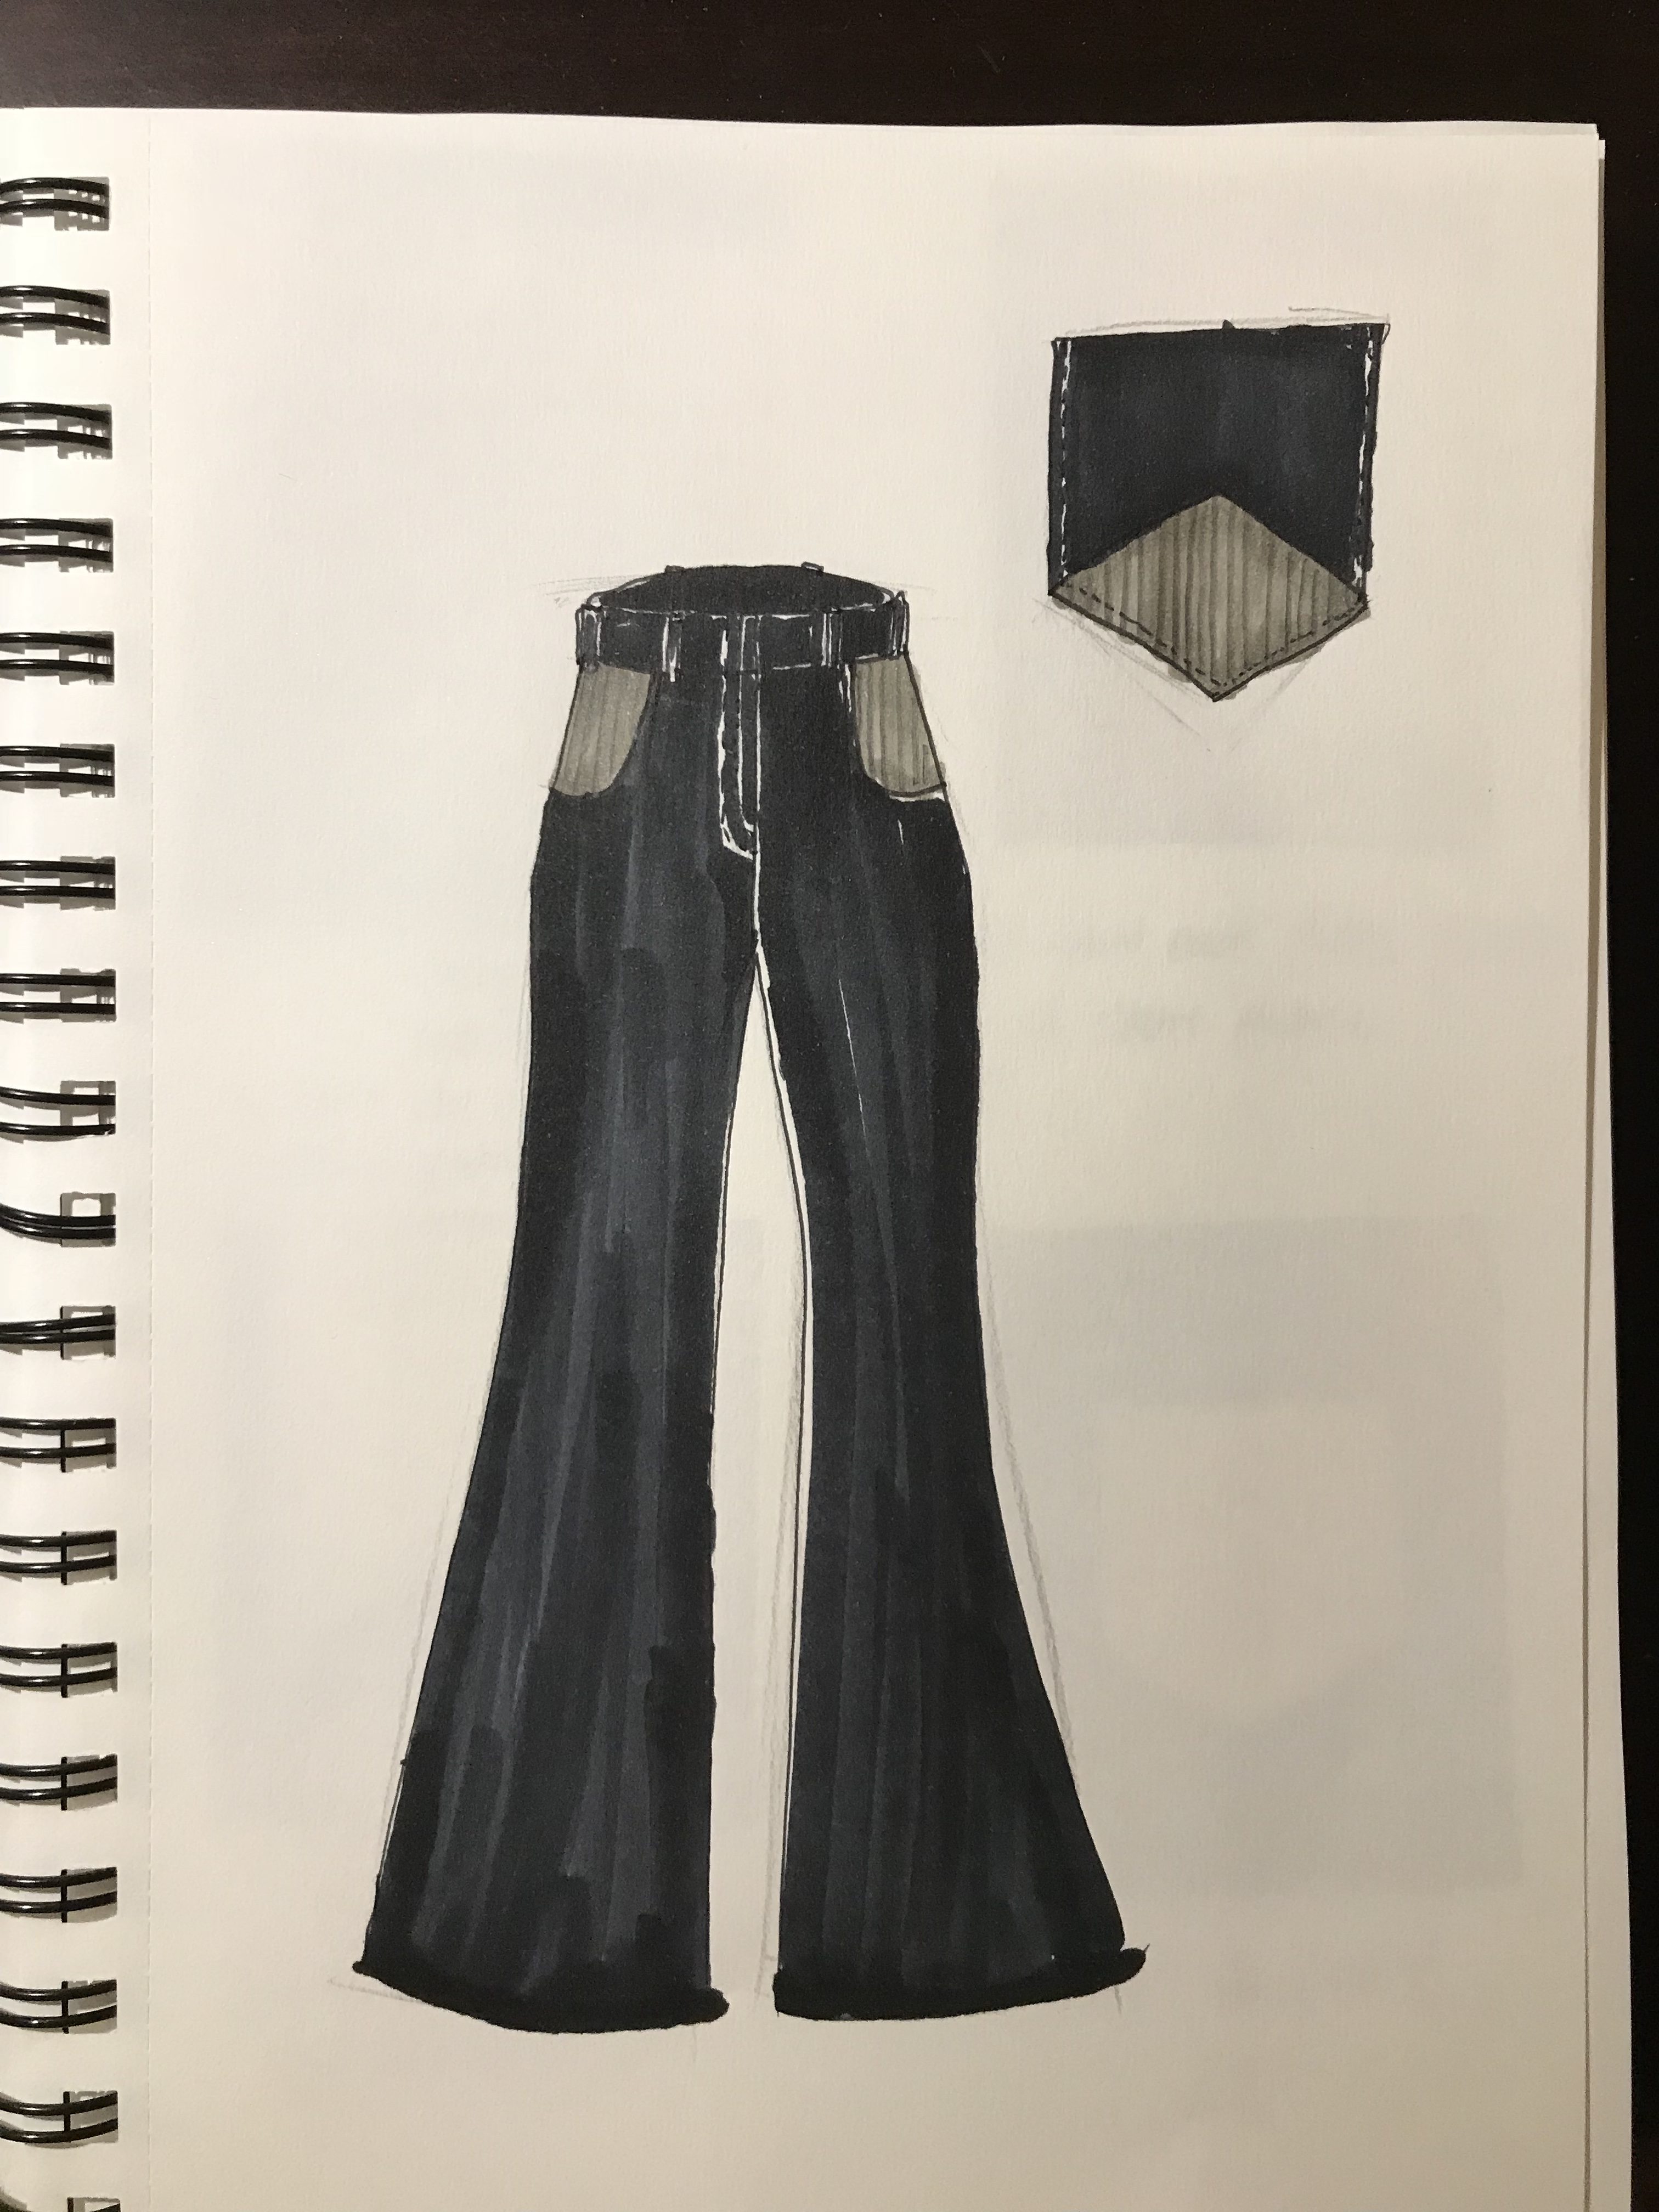 CREATIVE TECHNICAL: Project 2 pant